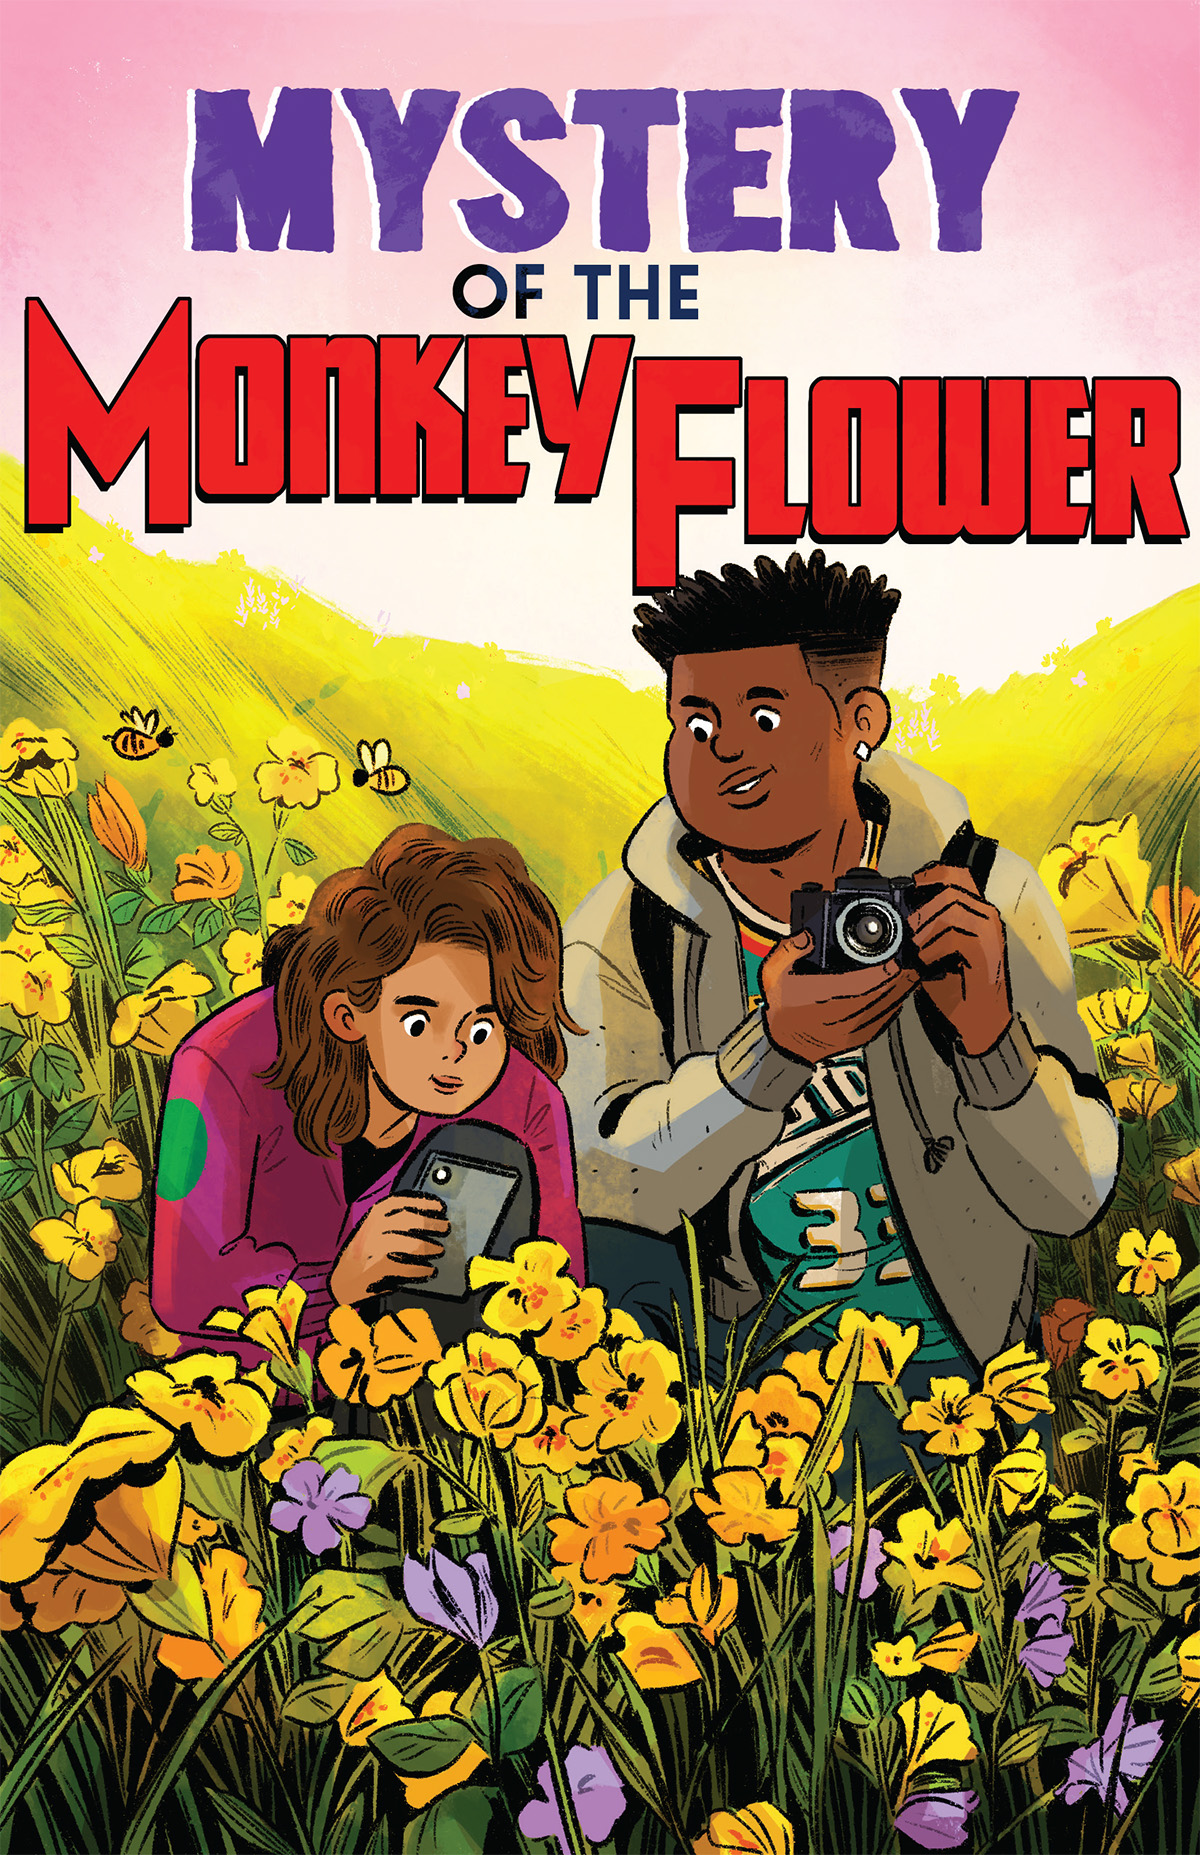 The cover of a comic book called “Mystery of a Monkeyflower.” It shows two young researchers standing in a field of yellow monkeyflowers.